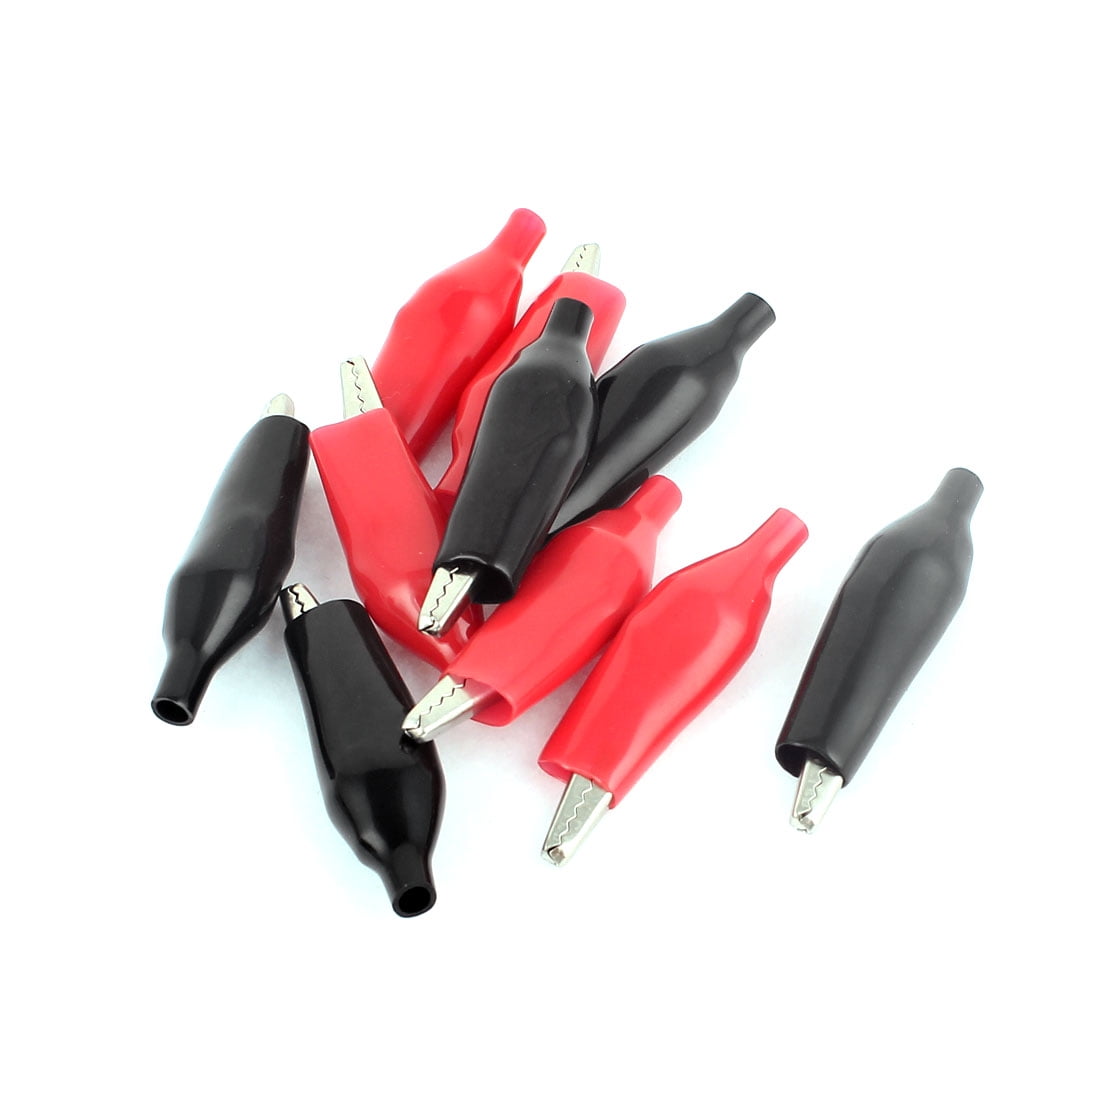 10pcs Alligator Clips Insulated Crocodile Clamps Red Black Test Probe Lead Set 